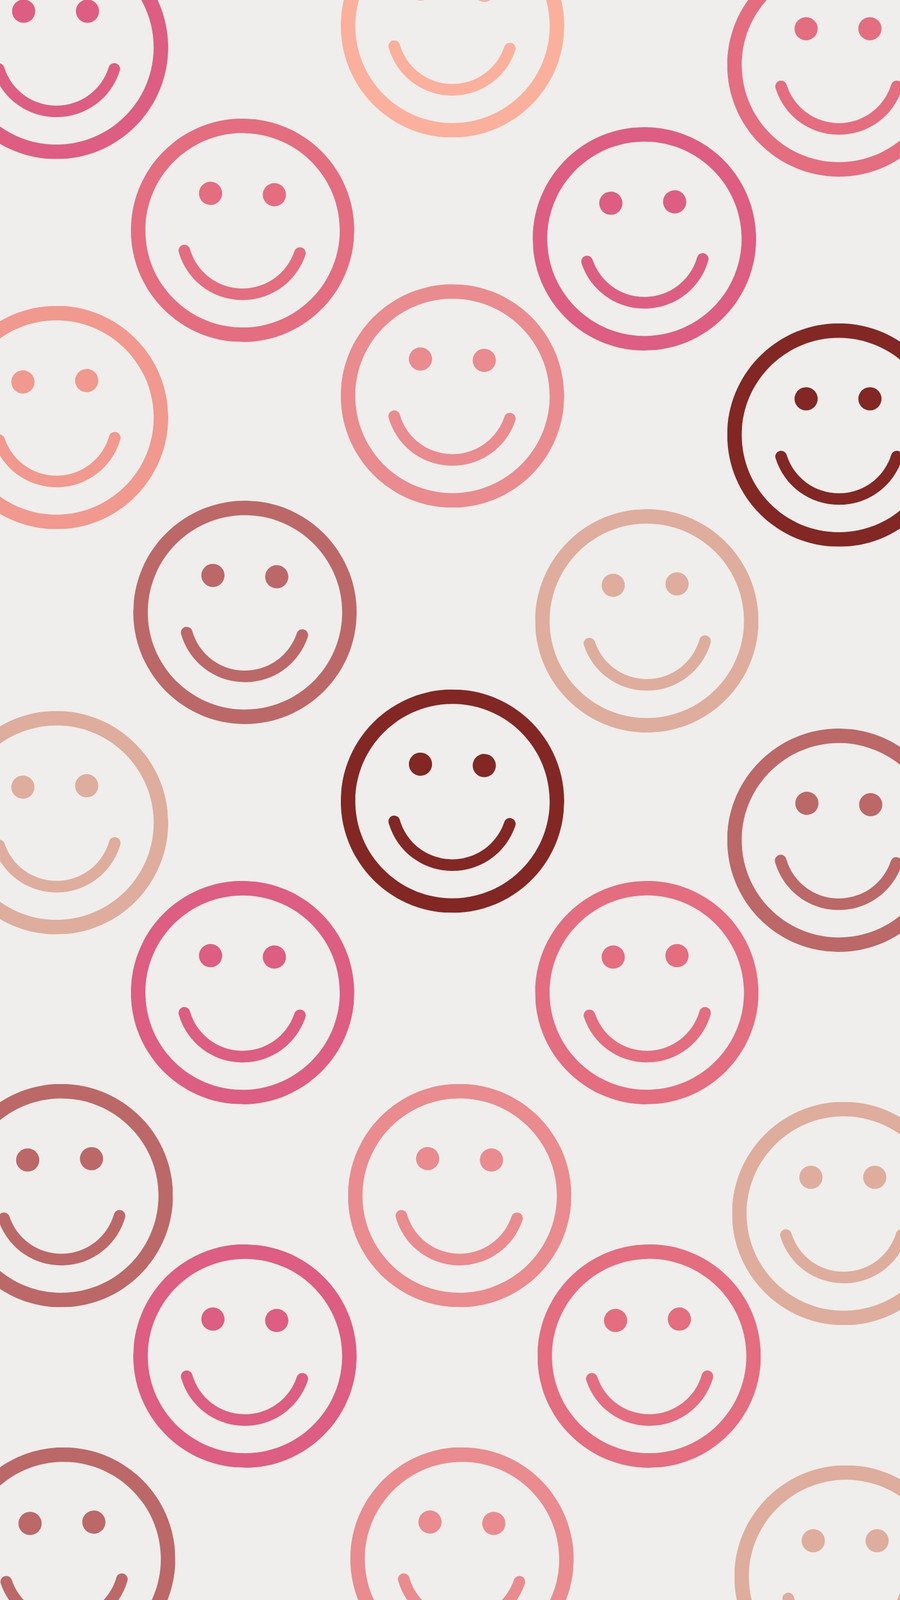 simple smiley face iphone background   Cute wallpapers Iphone wallpaper  Iphone wallpaper themes